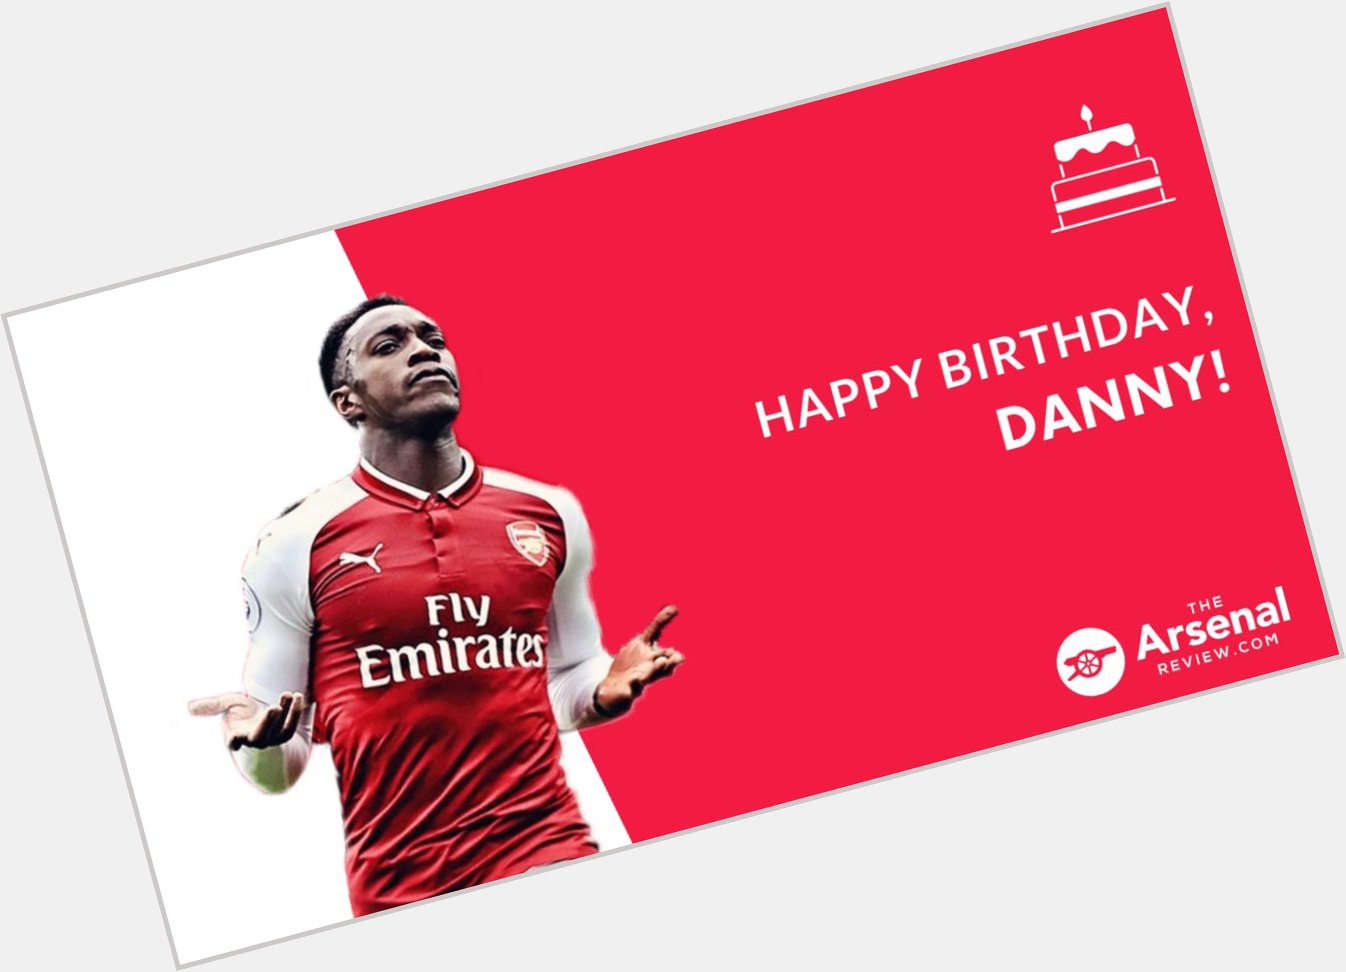  Happy birthday to Danny Welbeck, who turns 29 today! Have a good one, Danny! 